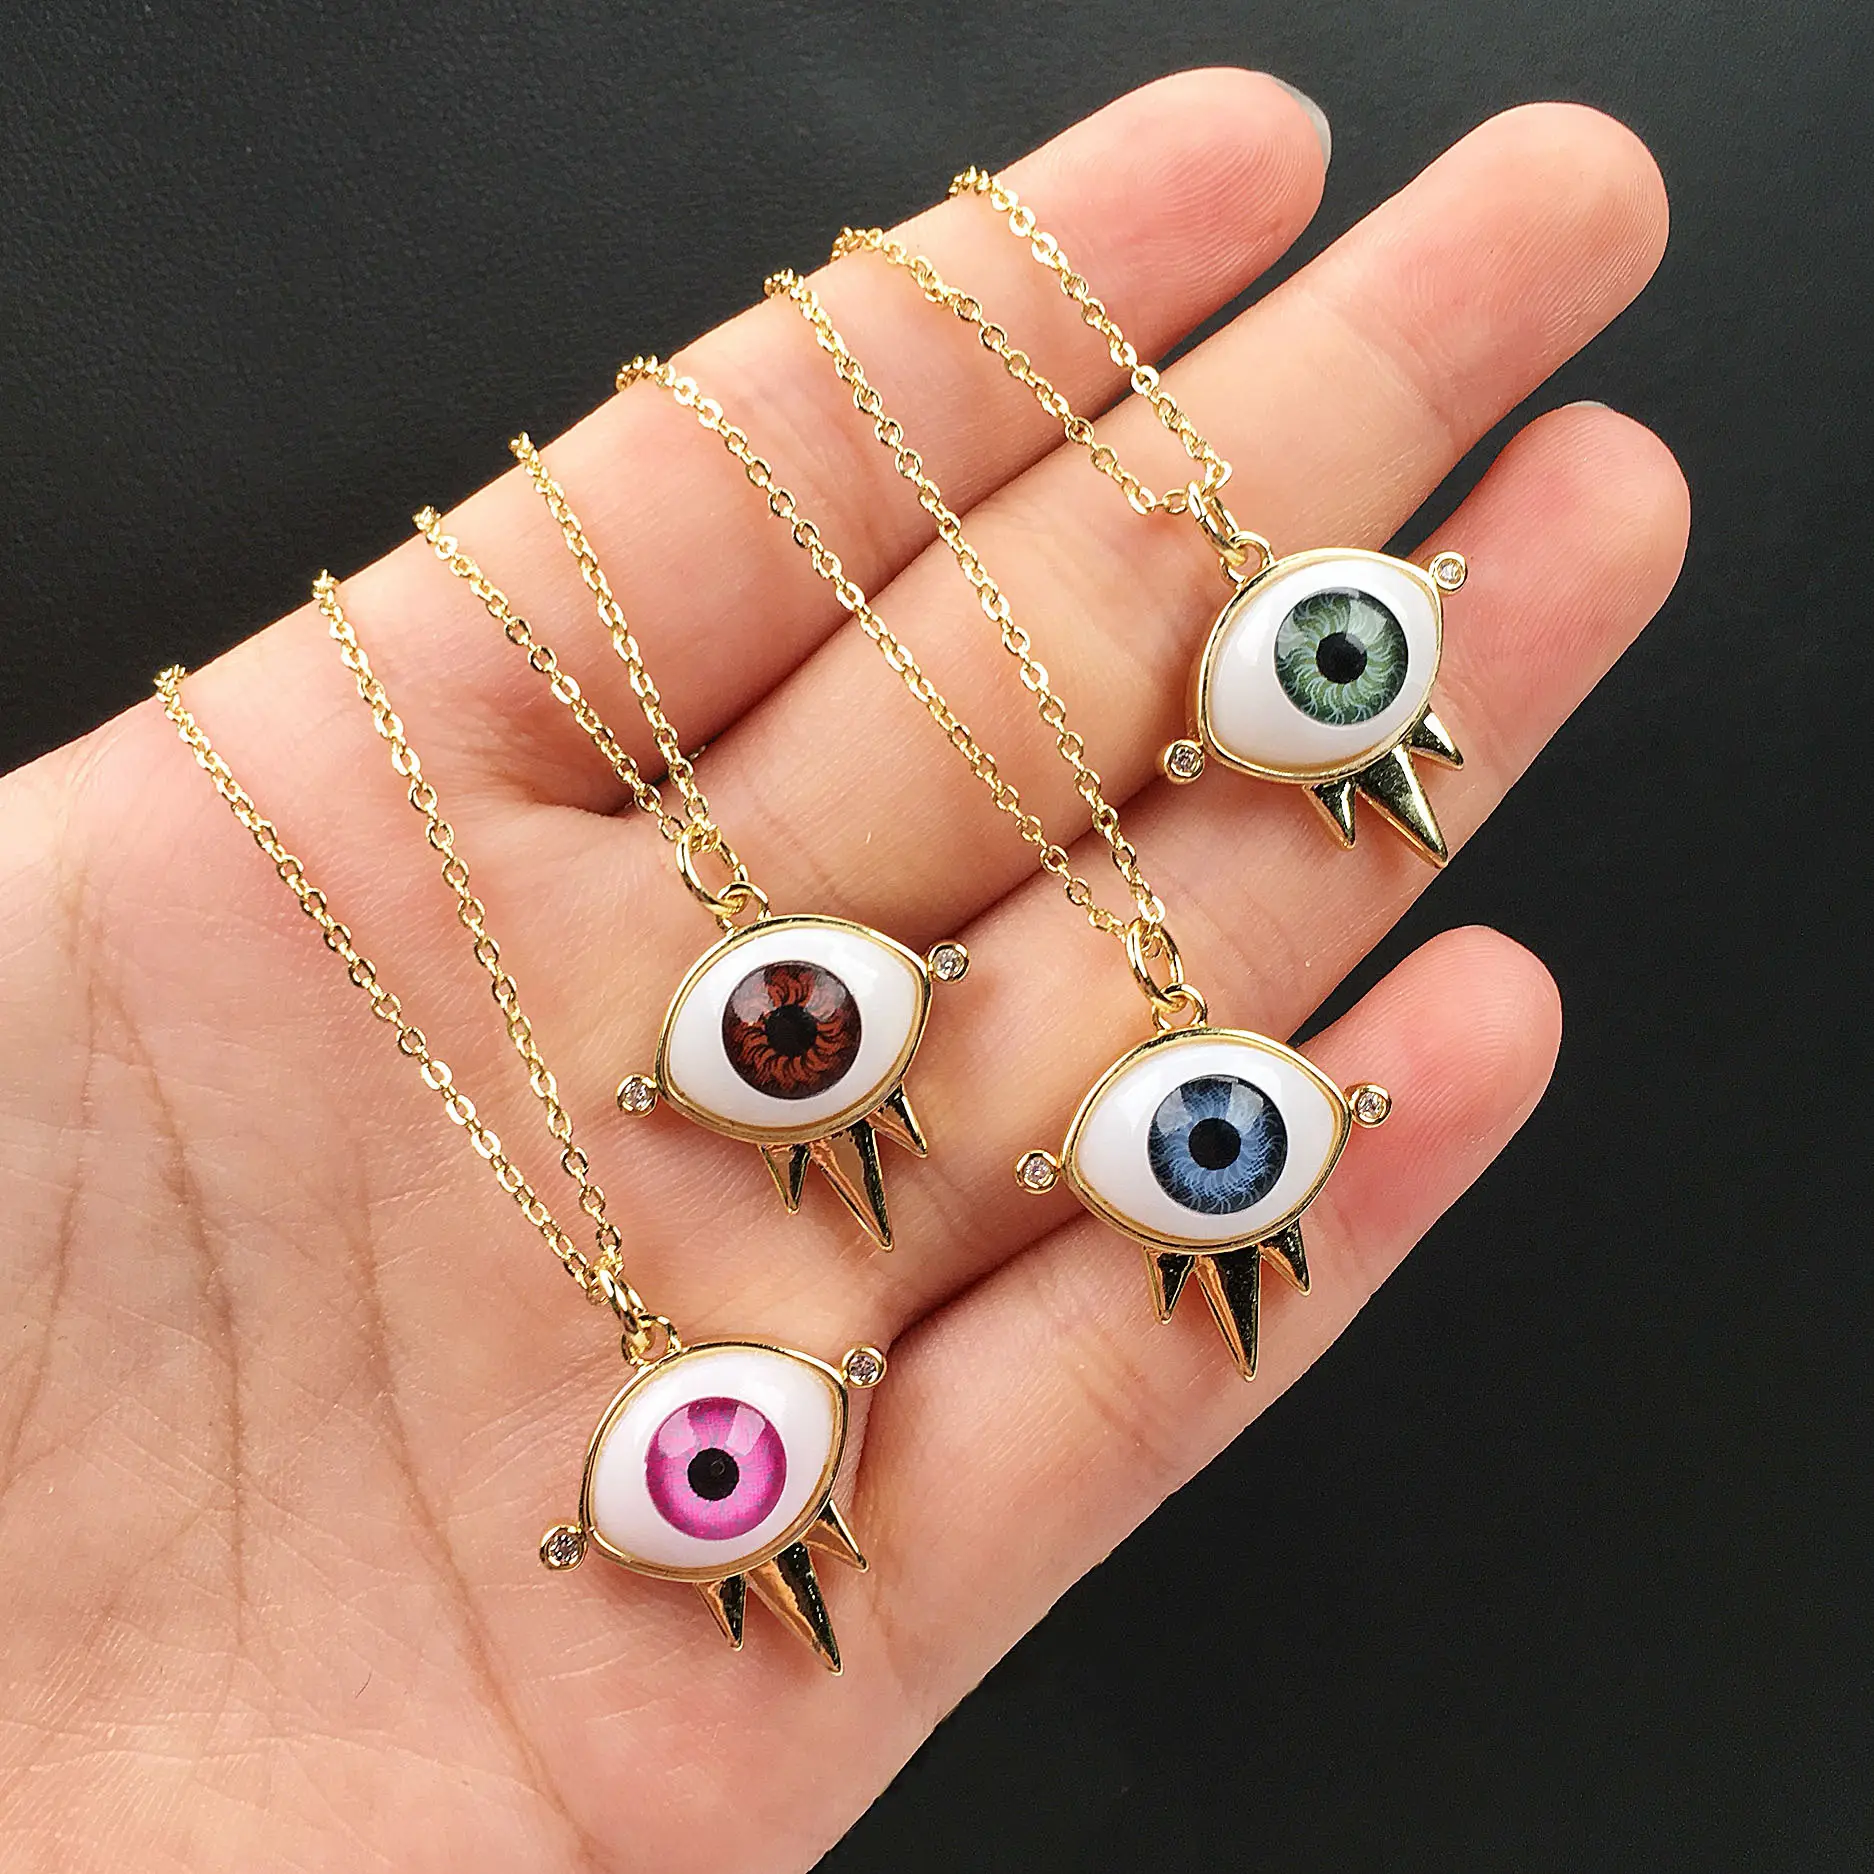 14k Solid Gold Evil Eyes Protection Pendant Necklace Adjustable Boho Colorful Lucky Turkish Protect Evil Eyes Collar Necklace